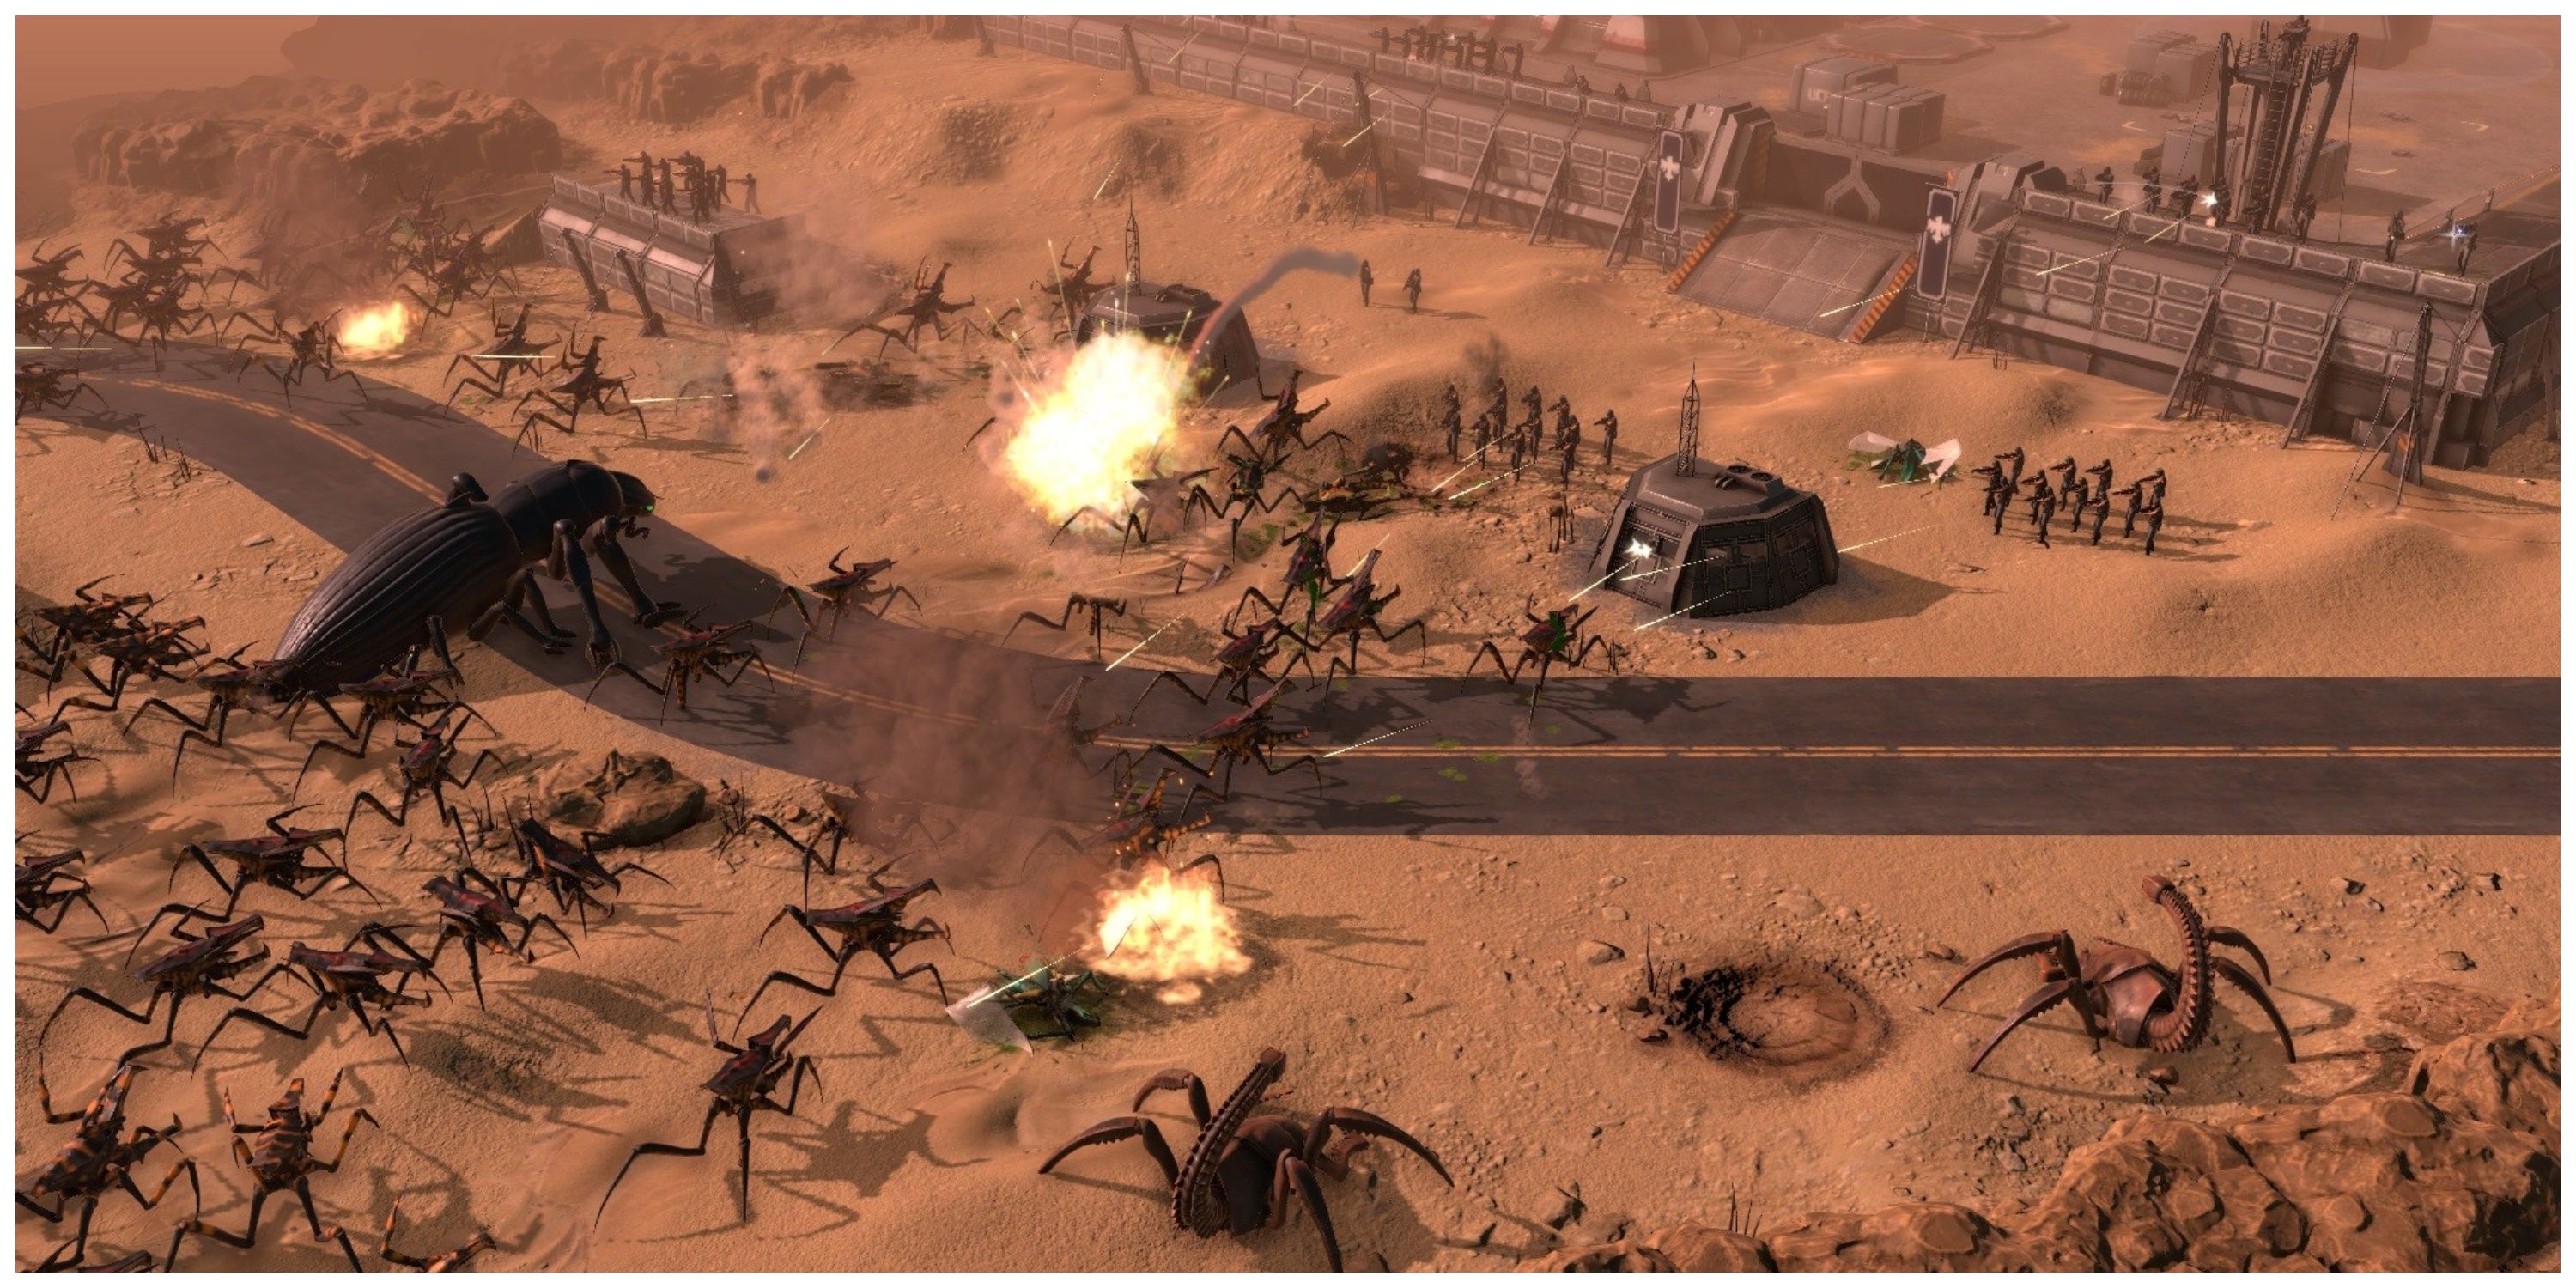 Starship Troopers: Terran Command - Steam Store Page Screenshot